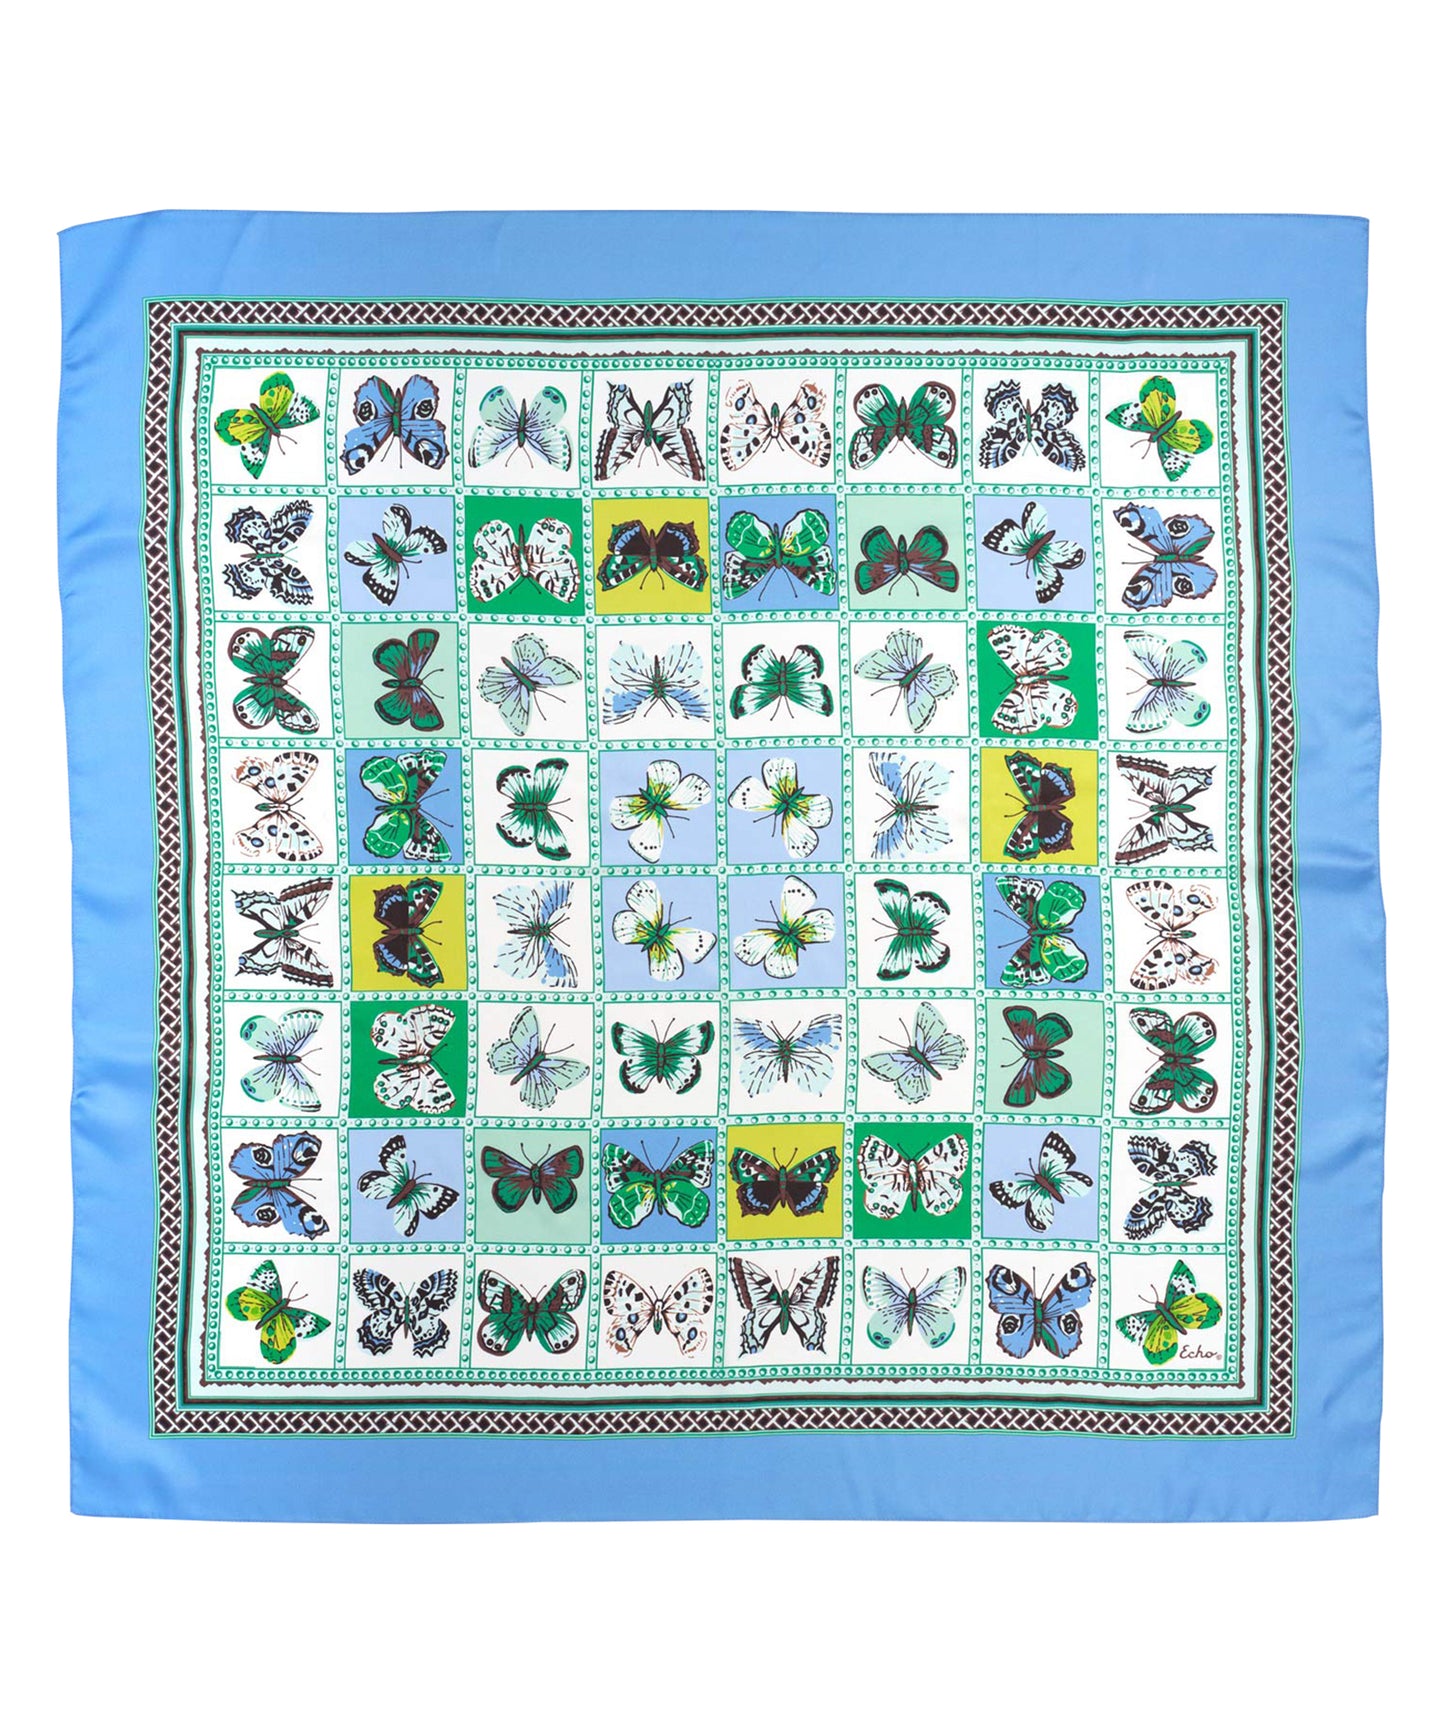 Butterfly Display Silk Square Scarf in color capri